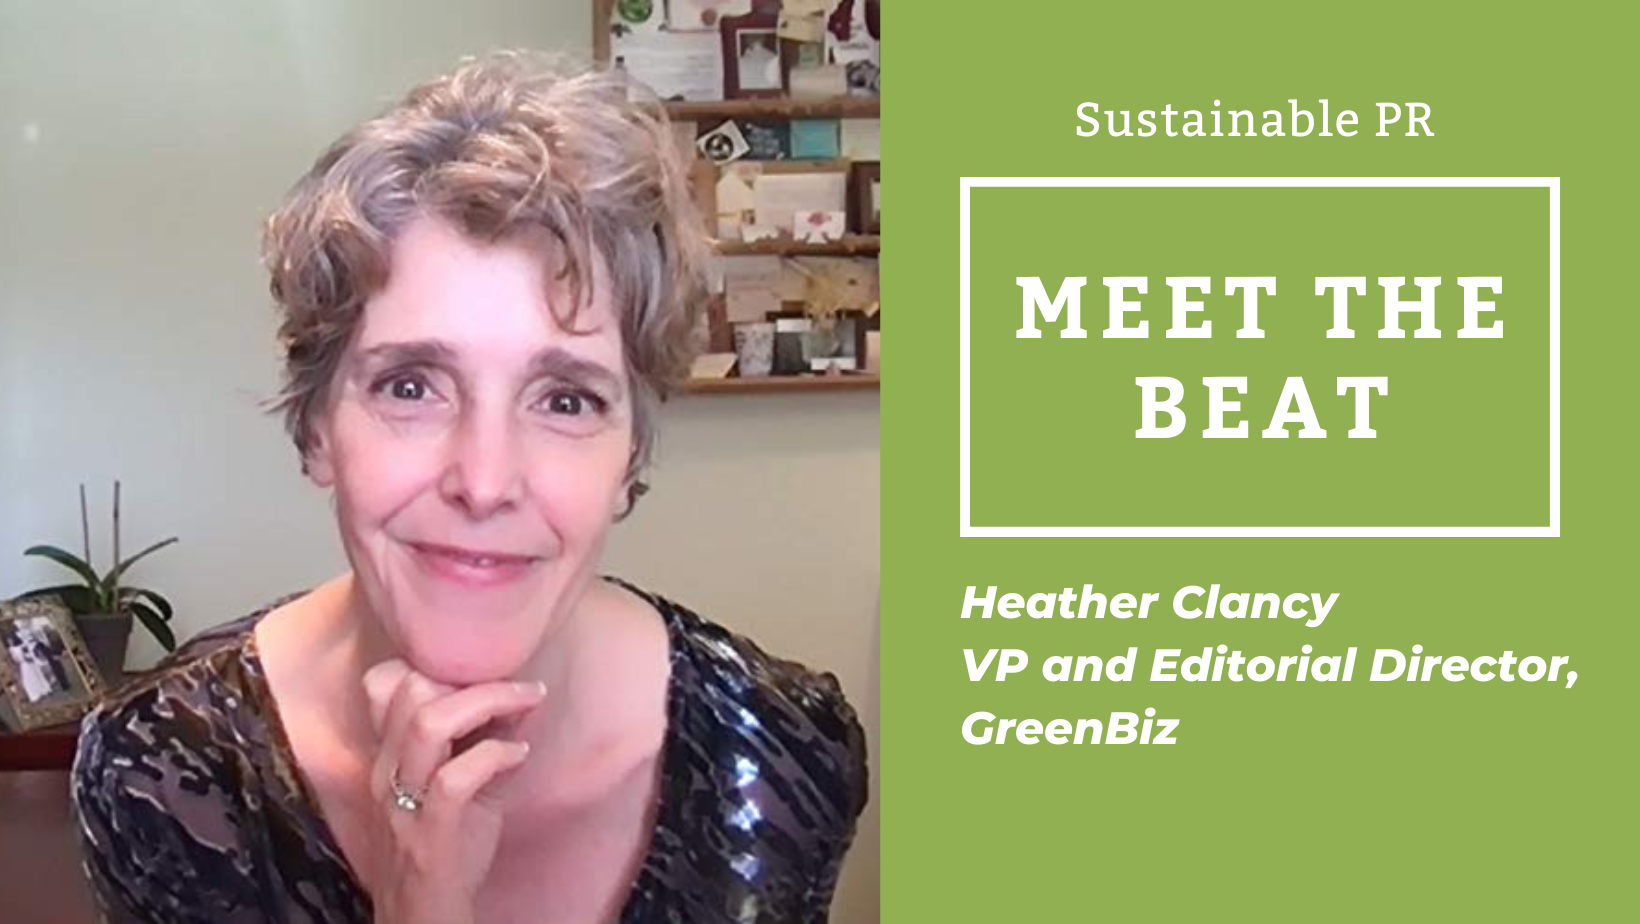 SPR’s Meet the Beat! with Heather Clancy